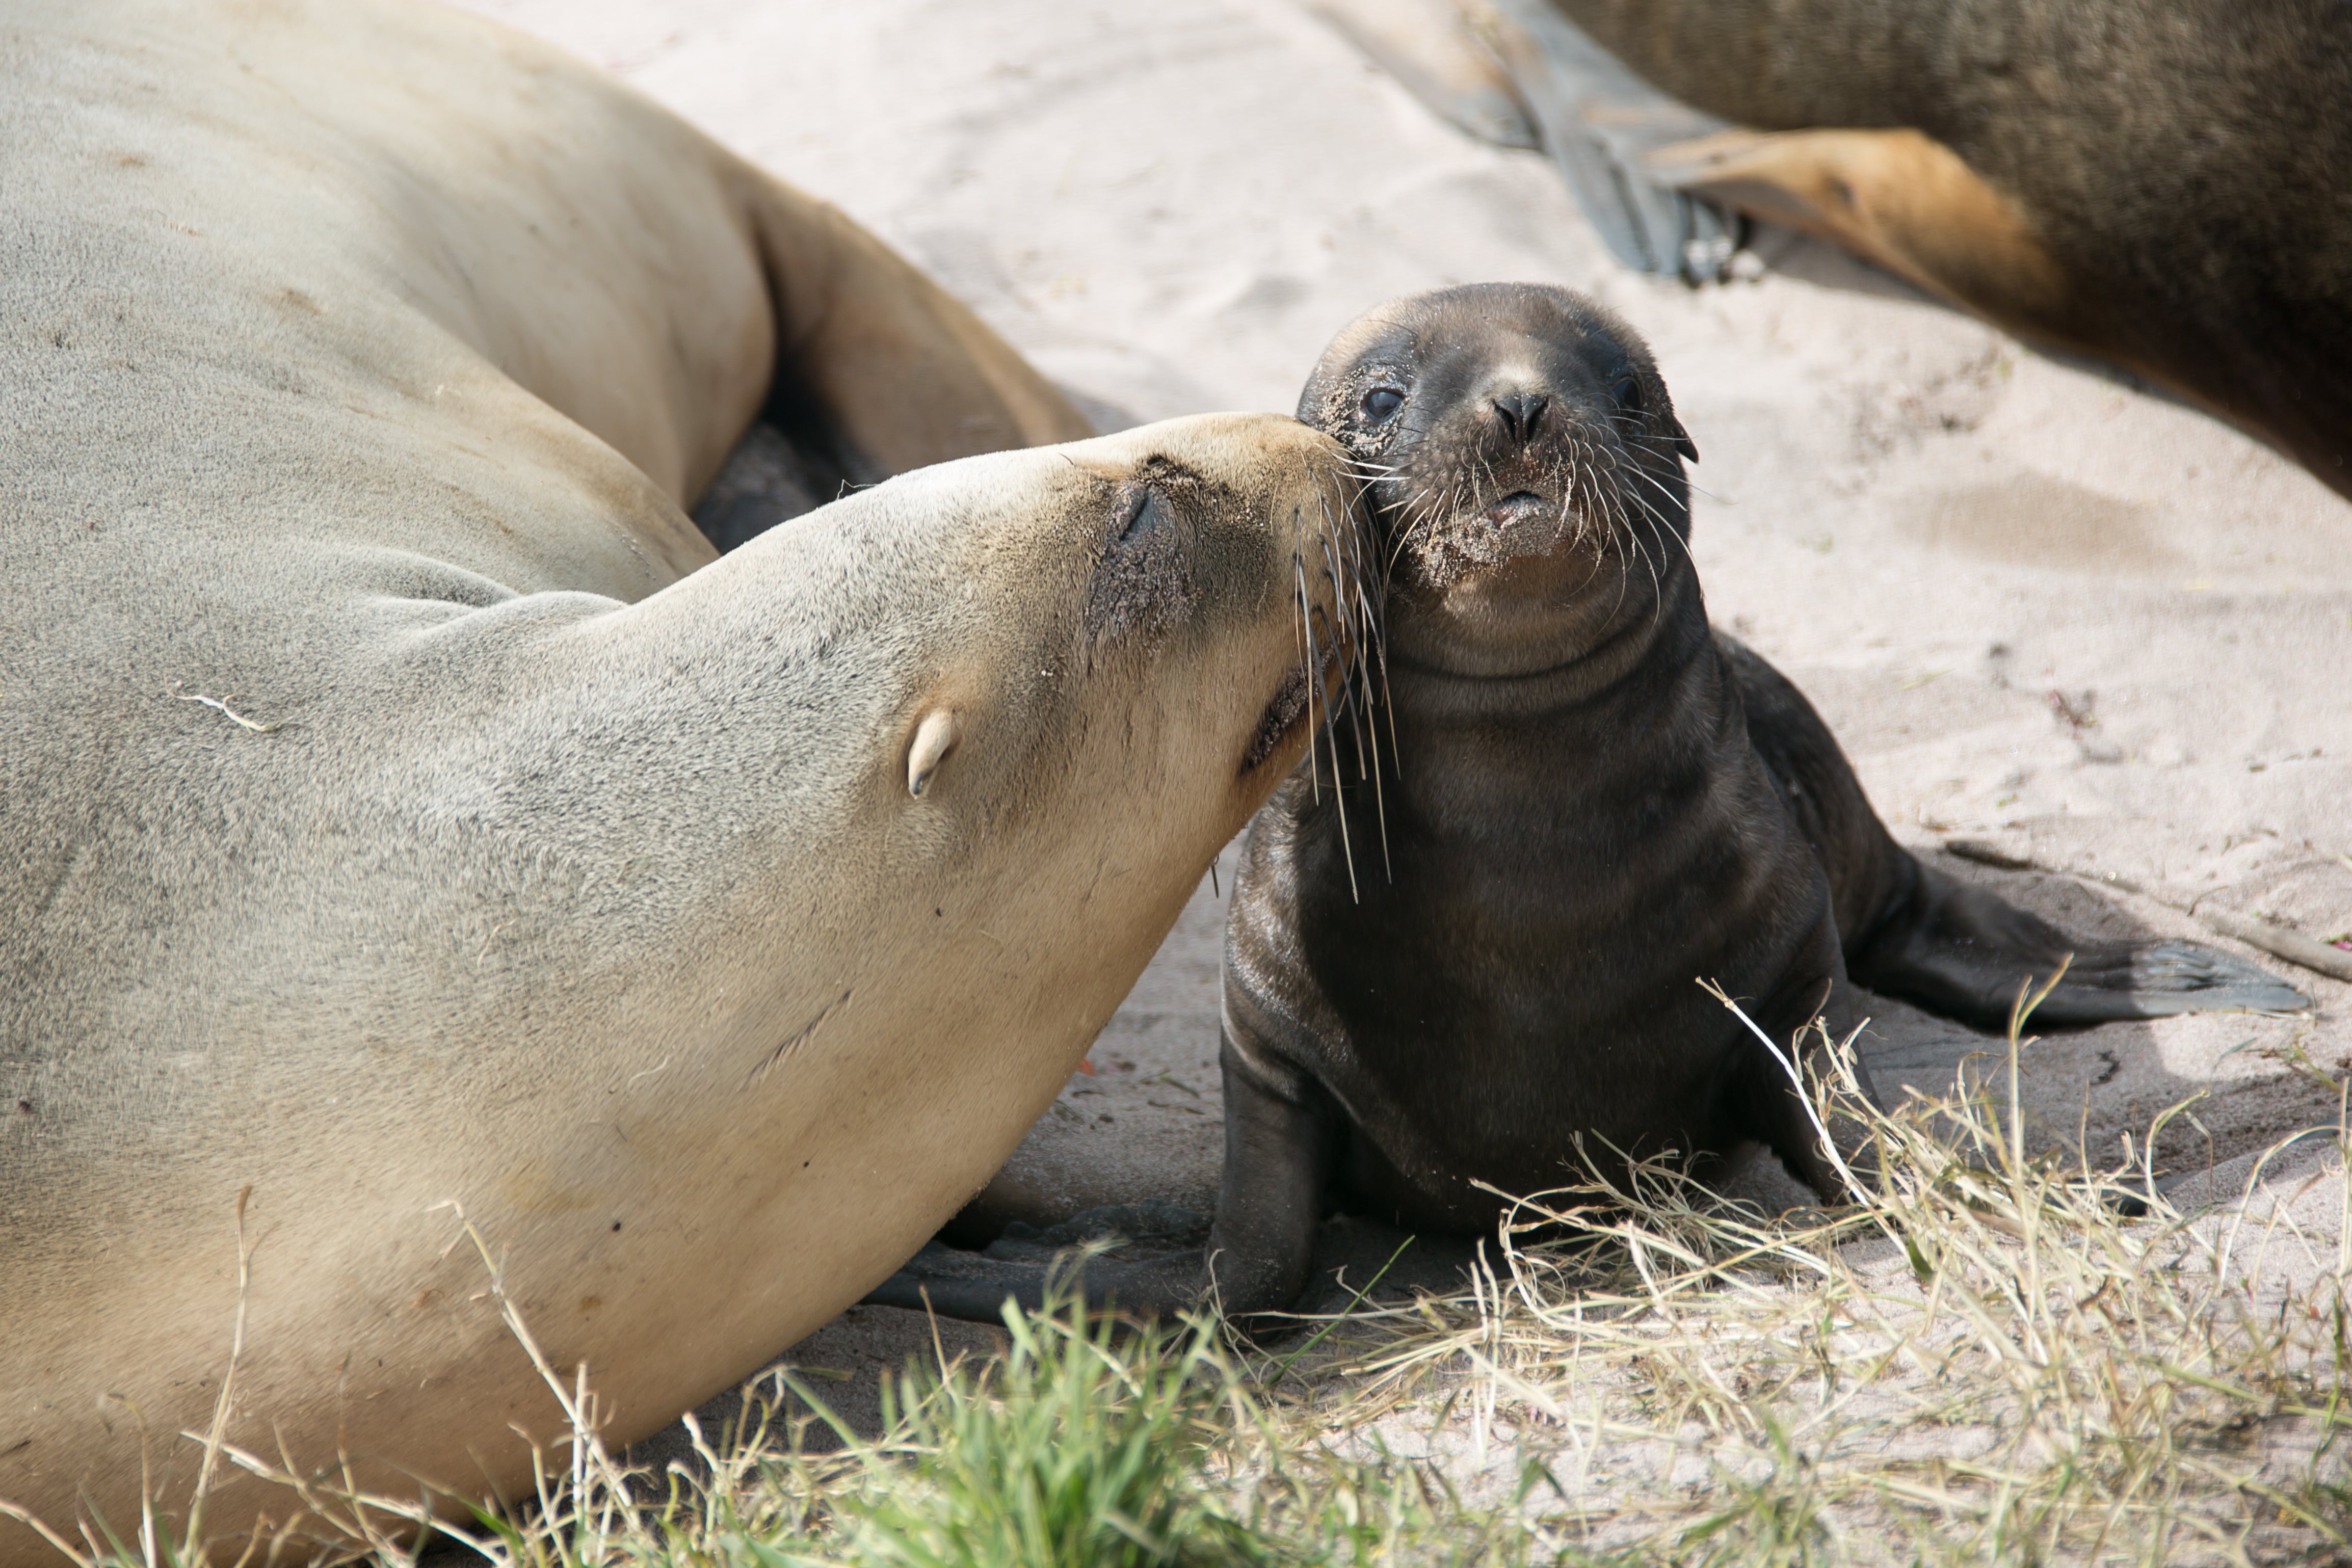 New Zealand city closes busy road for a month to let sea lion family nest